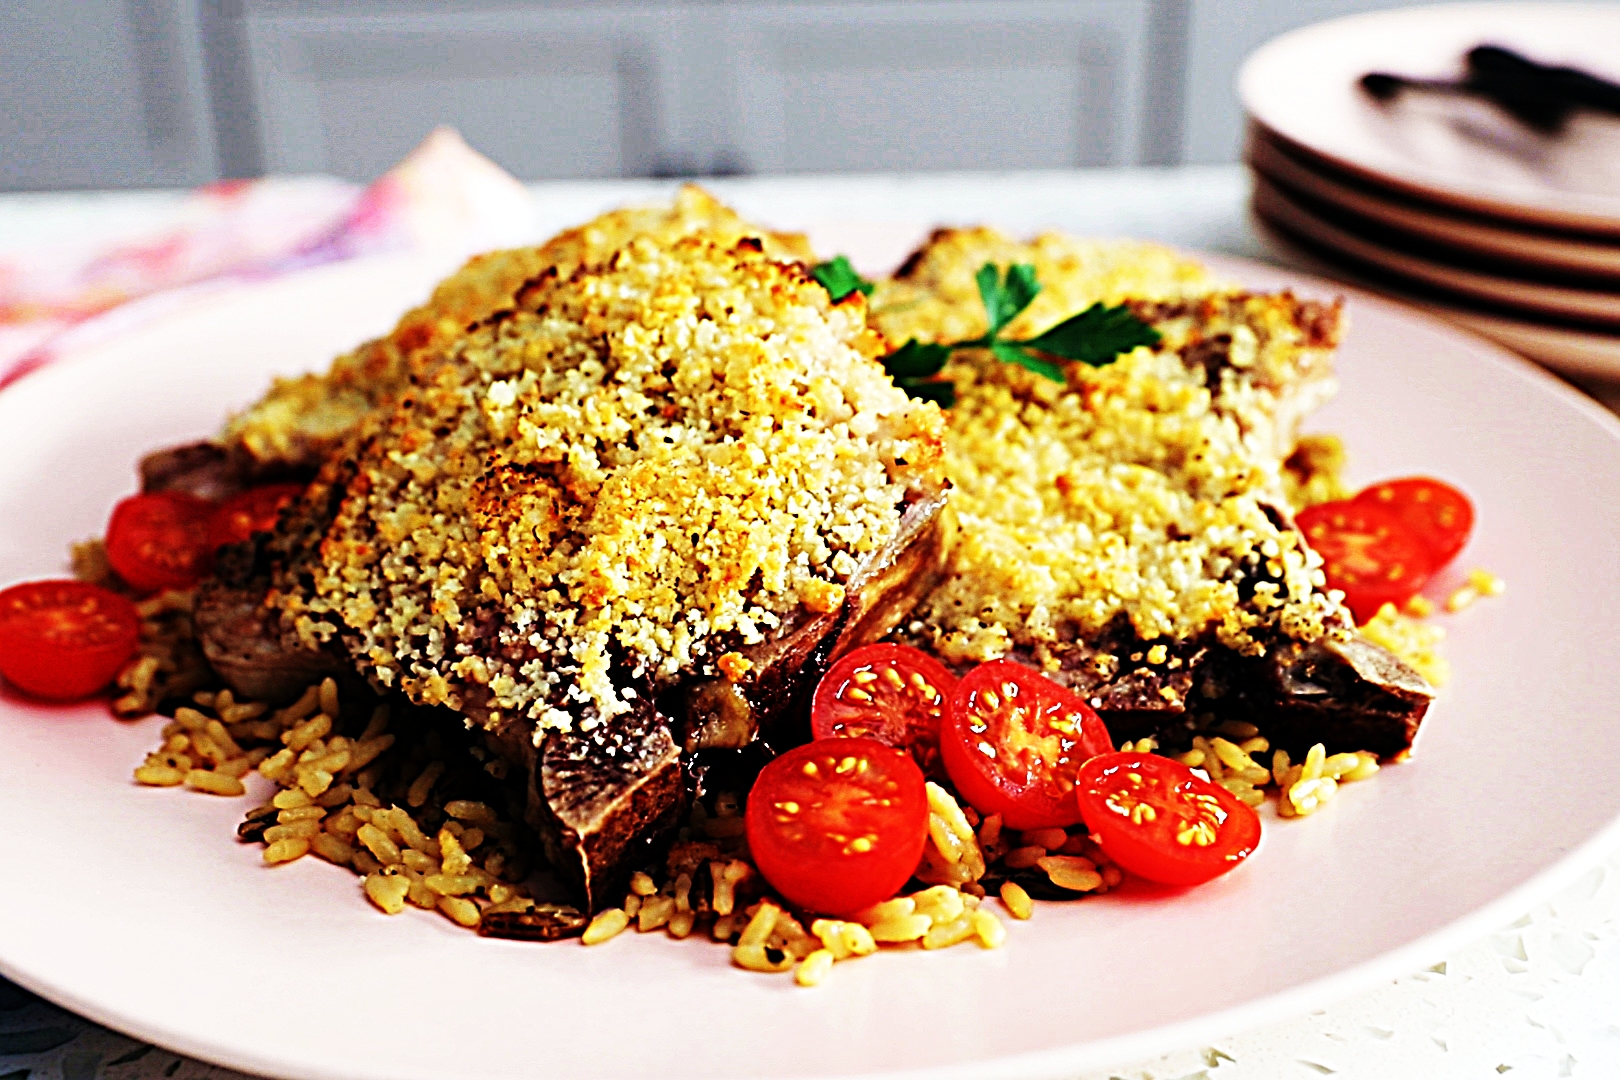 Stupid-Easy Recipe for Parmesan Crusted Baked Pork Chops (#1 Top-Rated)